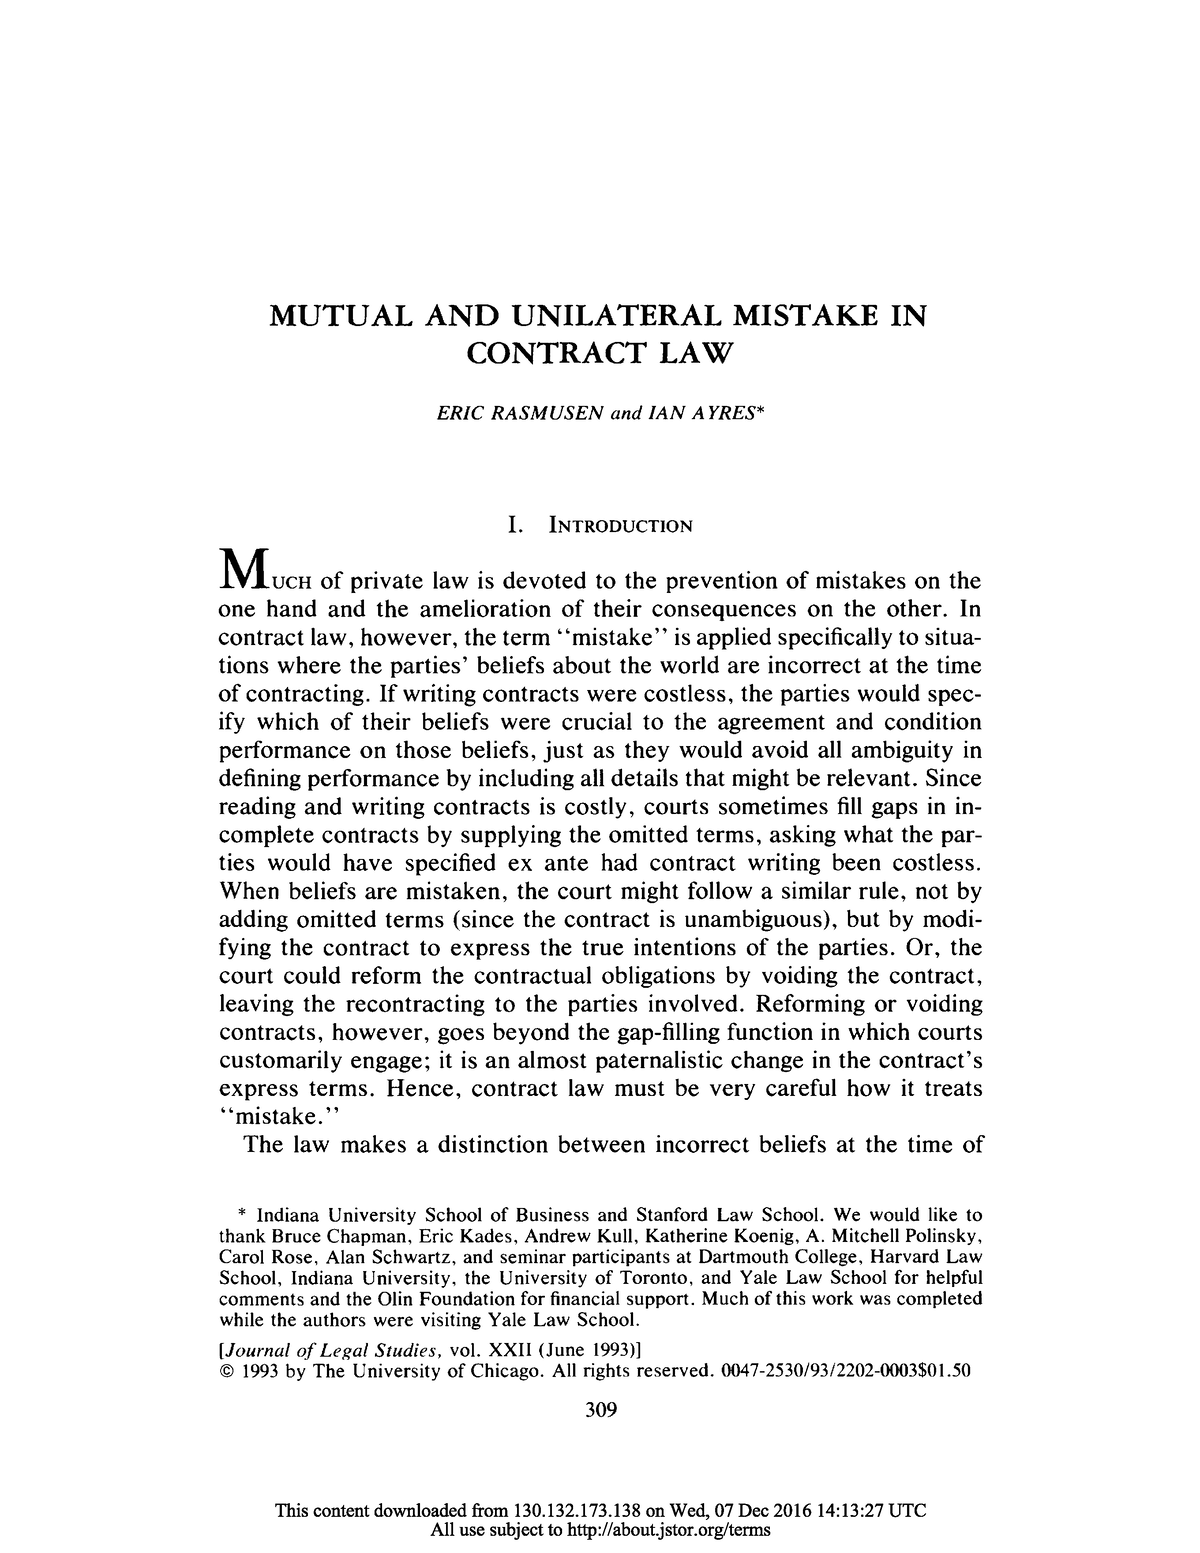 unilateral mistake contract law essay